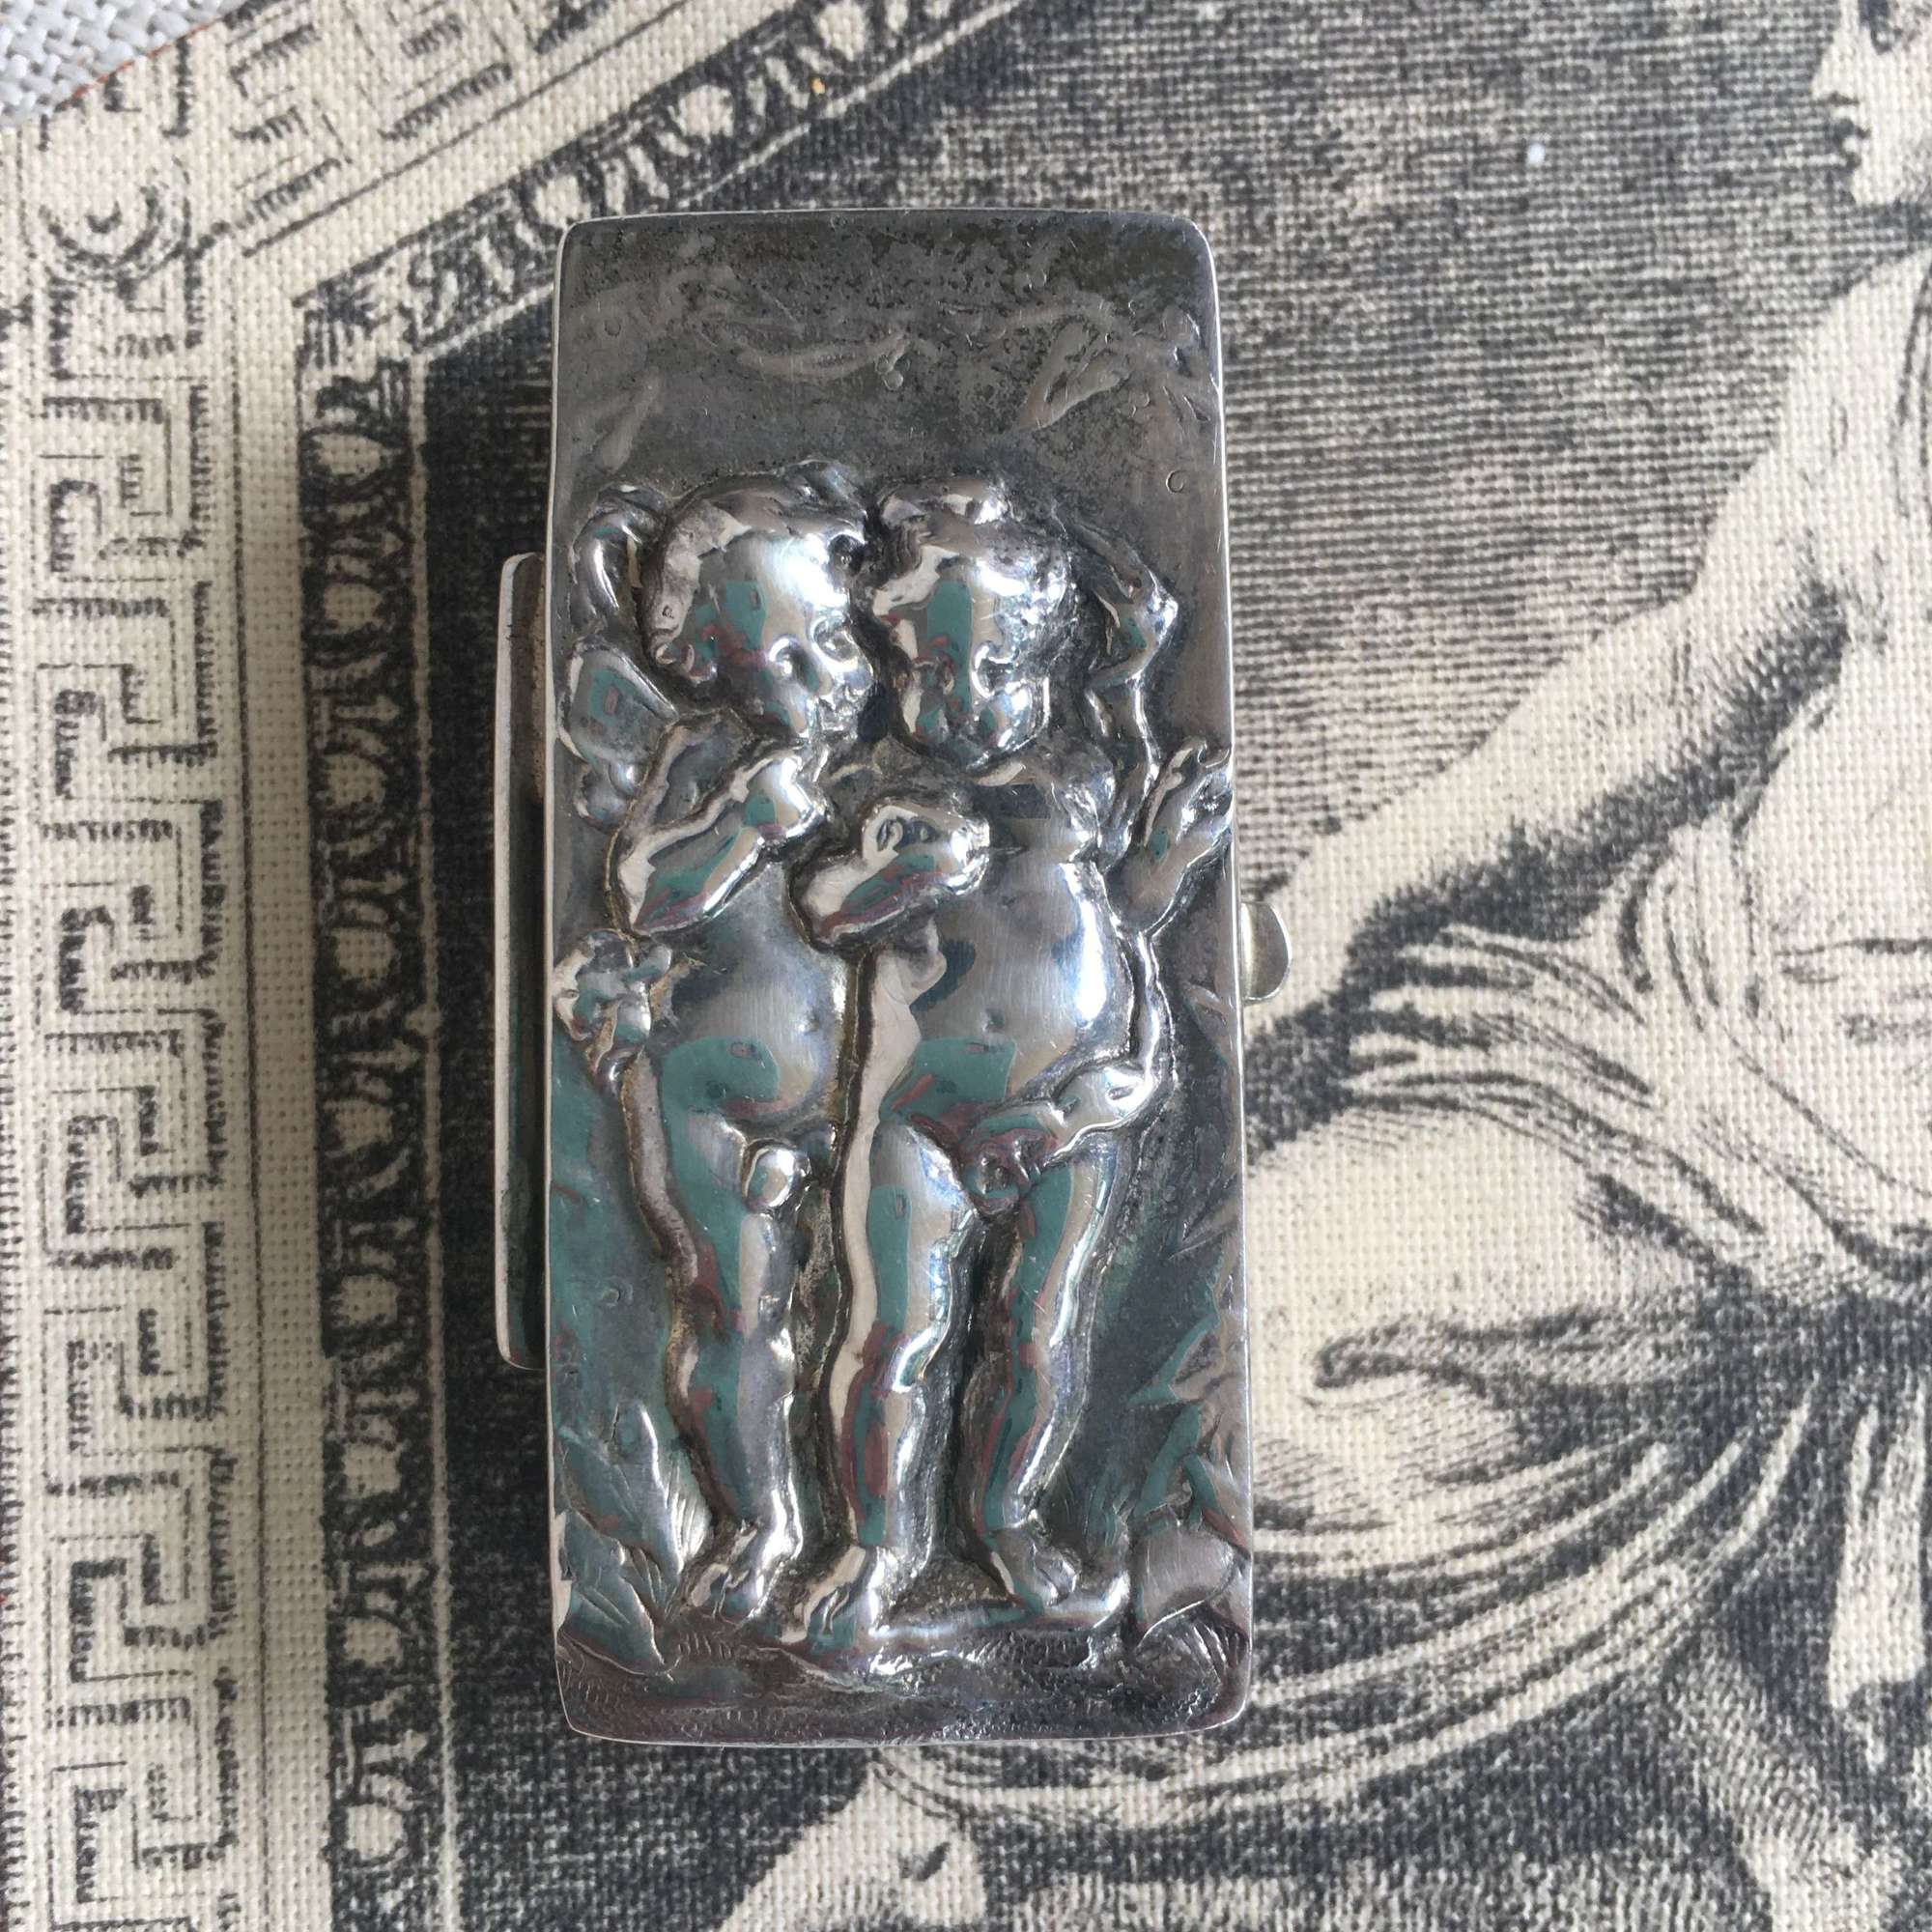 Vintage silver box with two cherubs